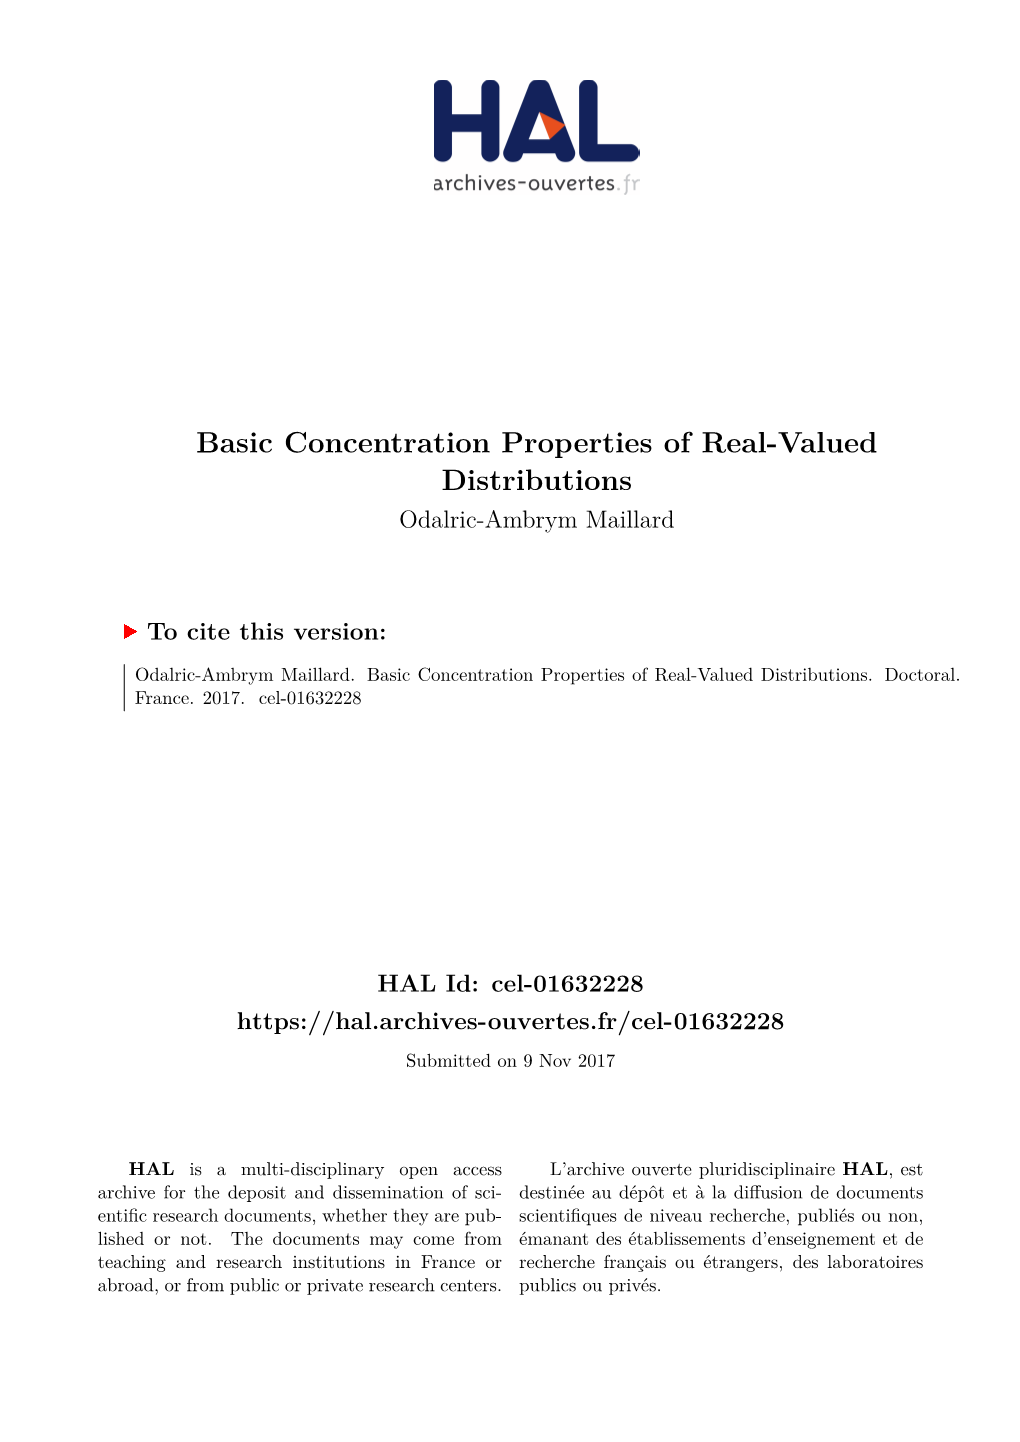 Basic Concentration Properties of Real-Valued Distributions Odalric-Ambrym Maillard